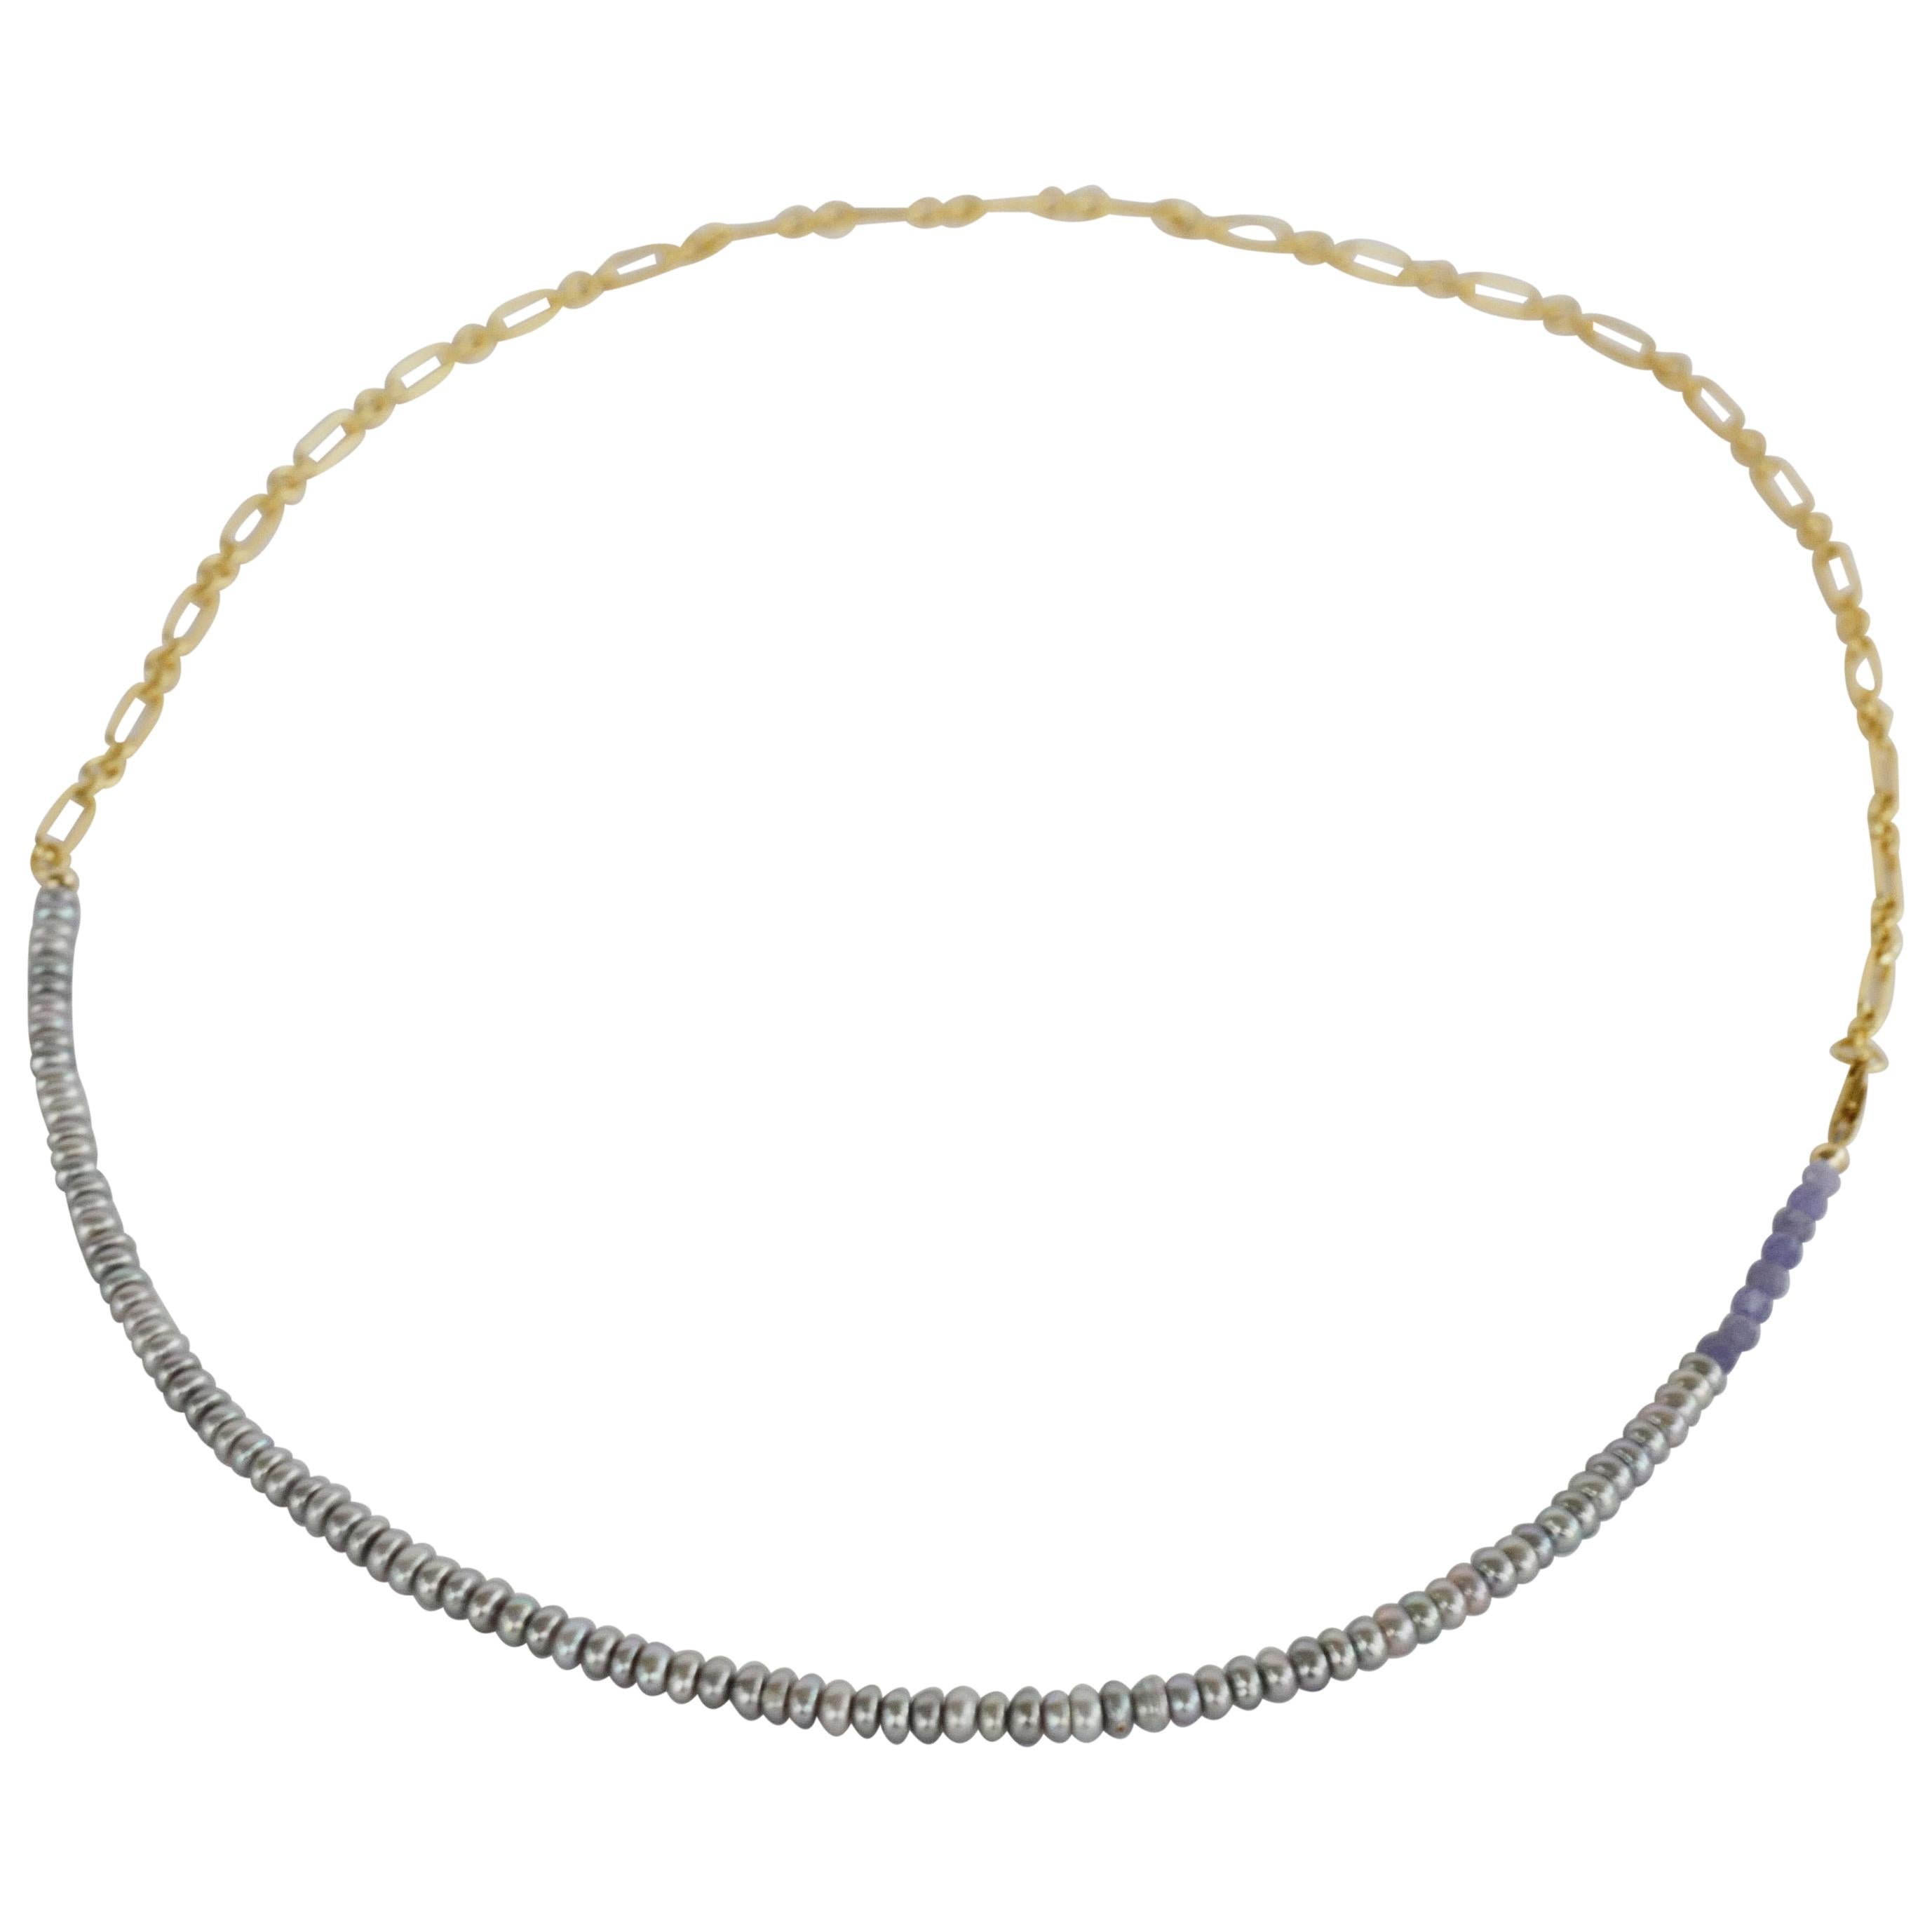 Tanzanite Silver Pearl Beaded Choker Gold Filled Chain Necklace J Dauphin